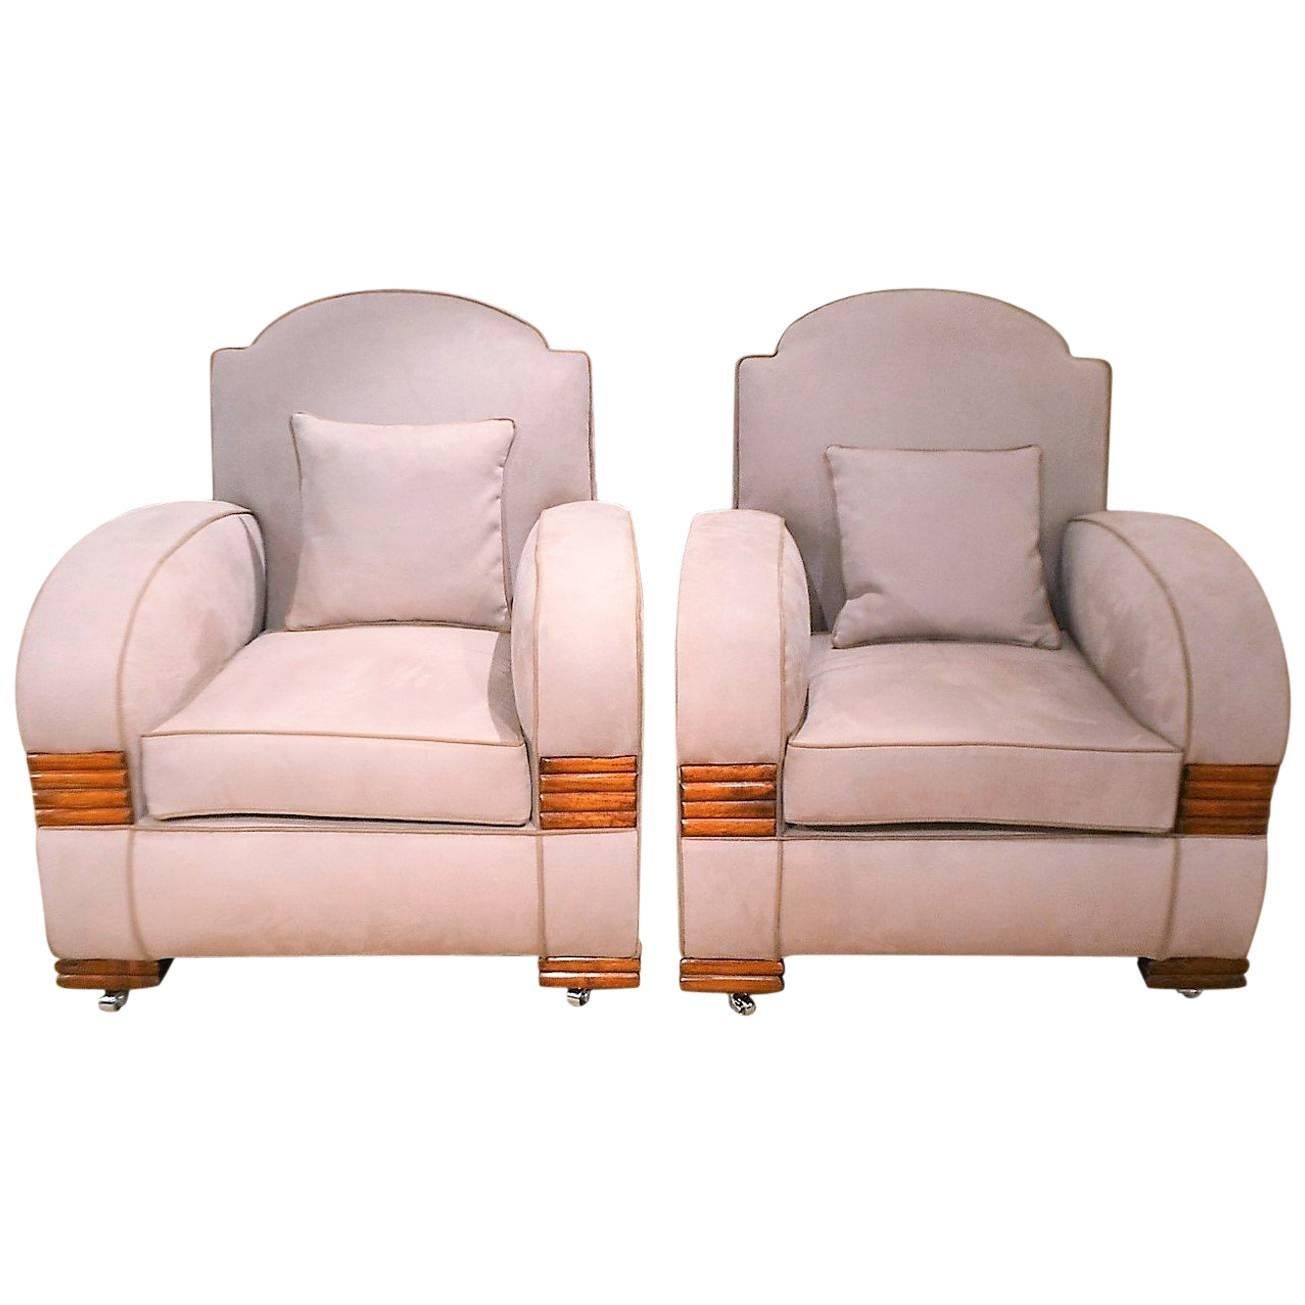 Pair of Art Deco Armchairs with Walnut Detailing